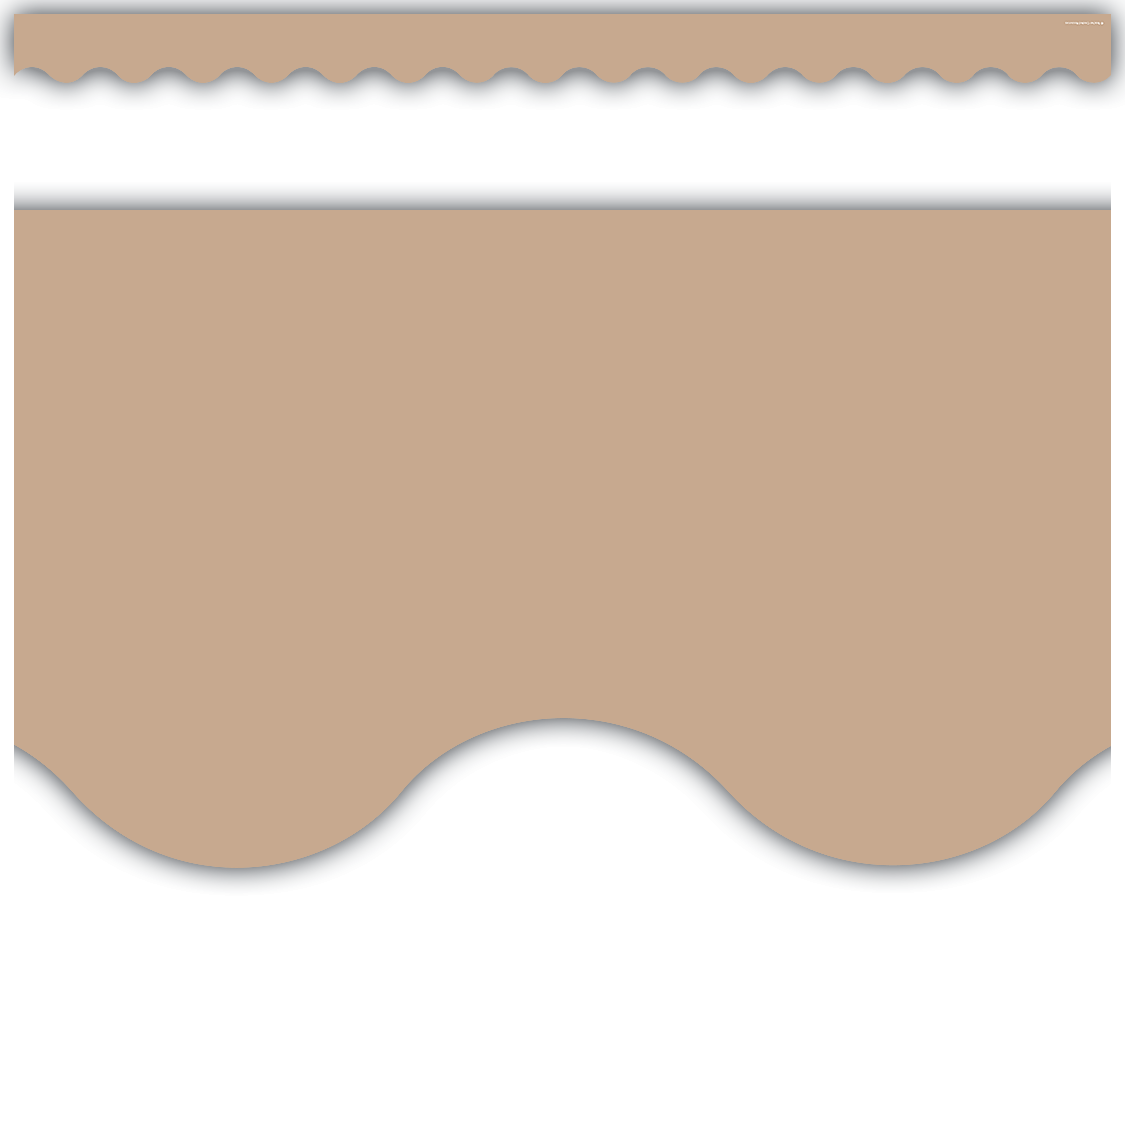 Teacher Created Resources Light Brown Scalloped Border Trim TCR7129 